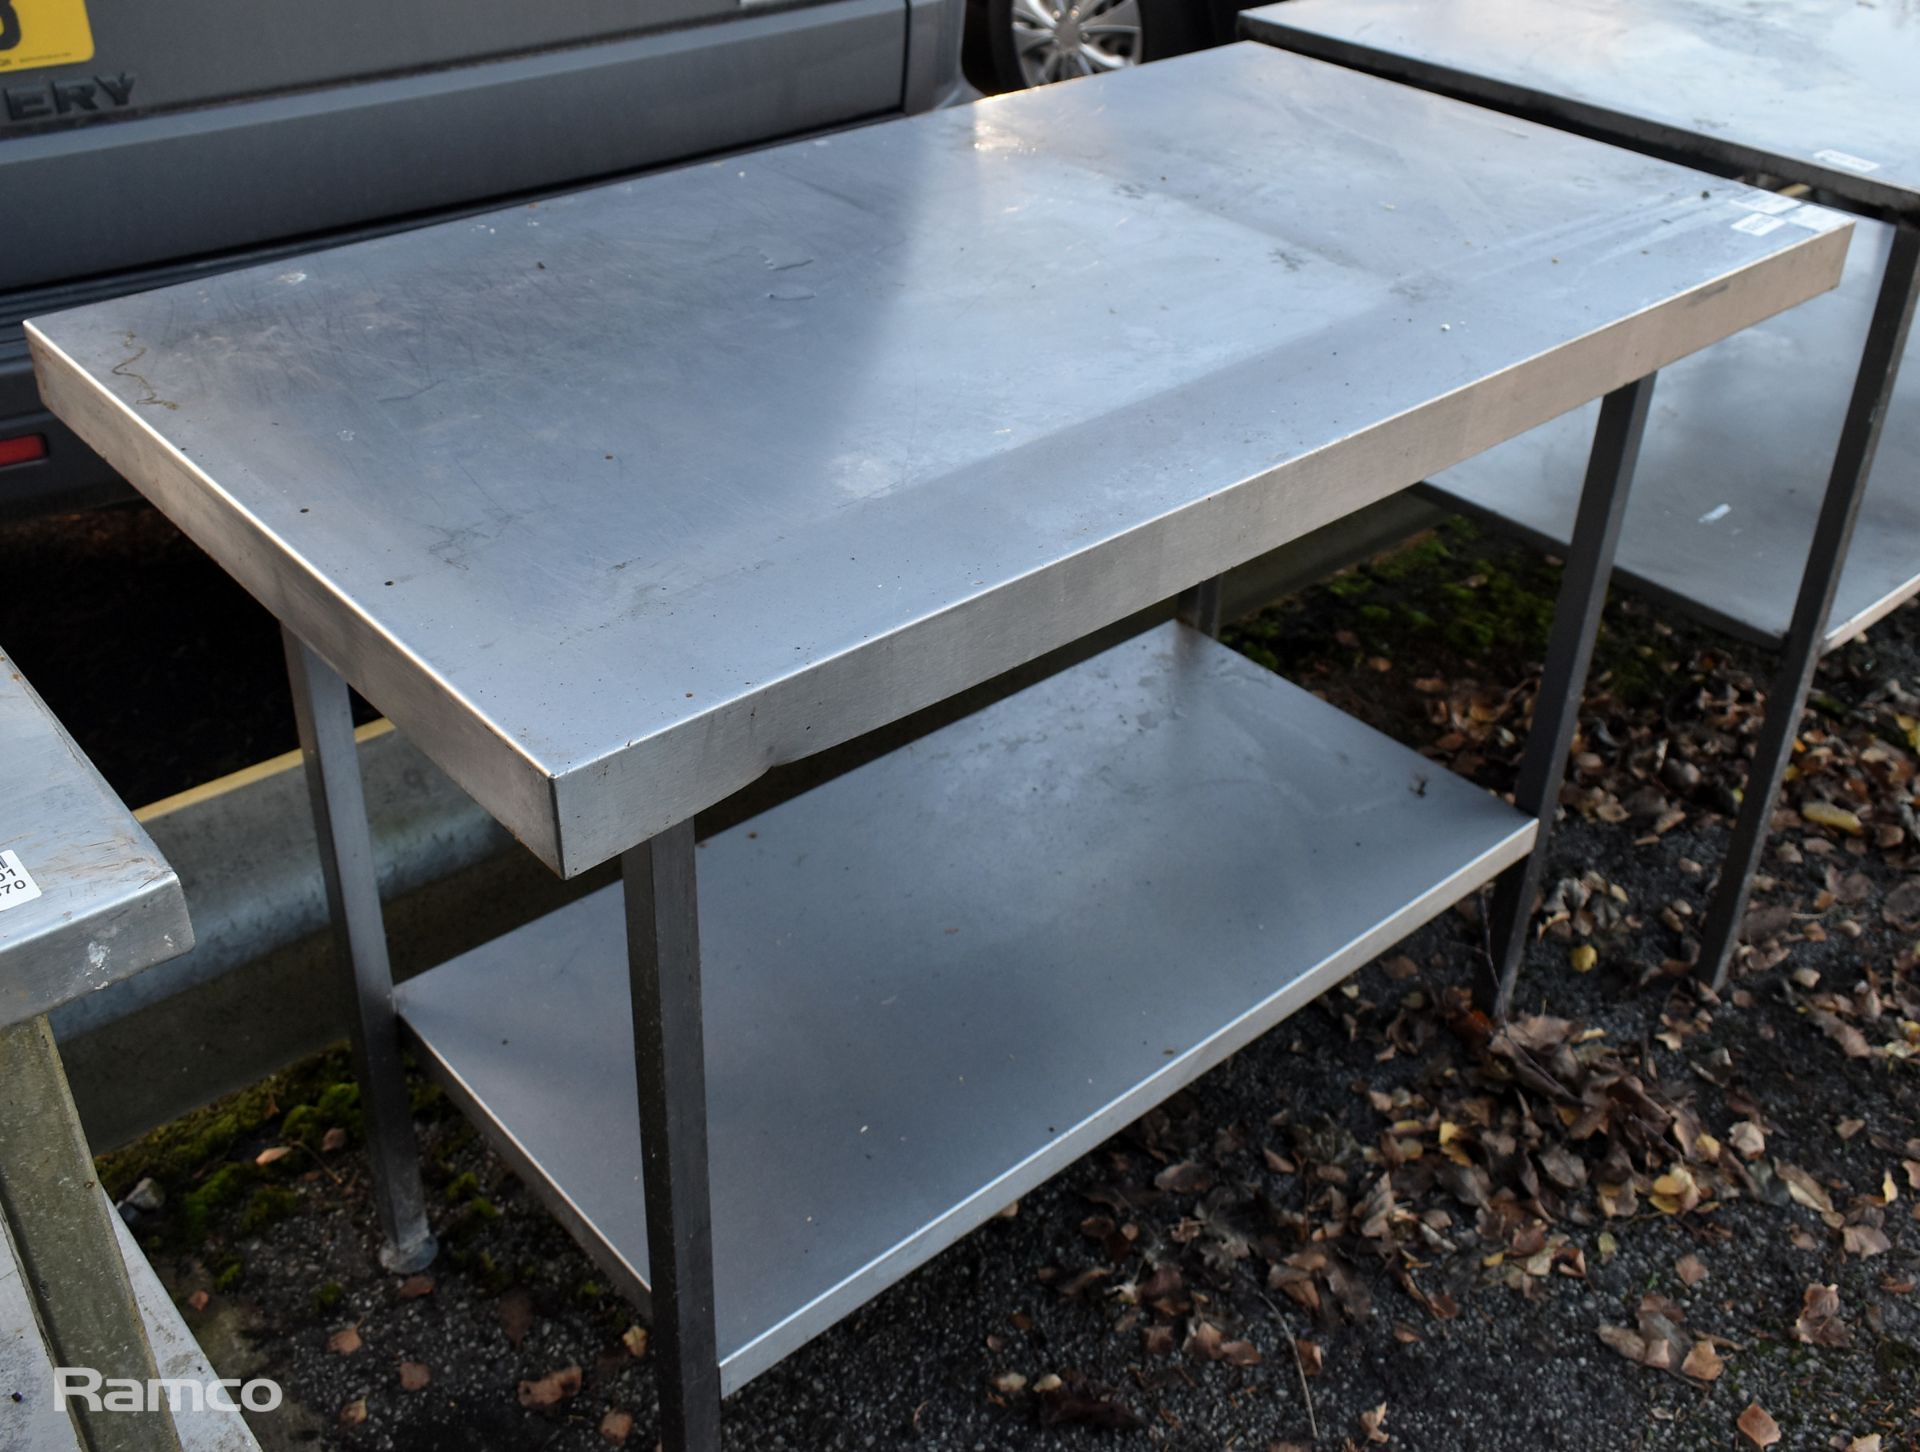 Stainless steel preparation table - L 1200 x W 650 x H 860mm - Image 2 of 3